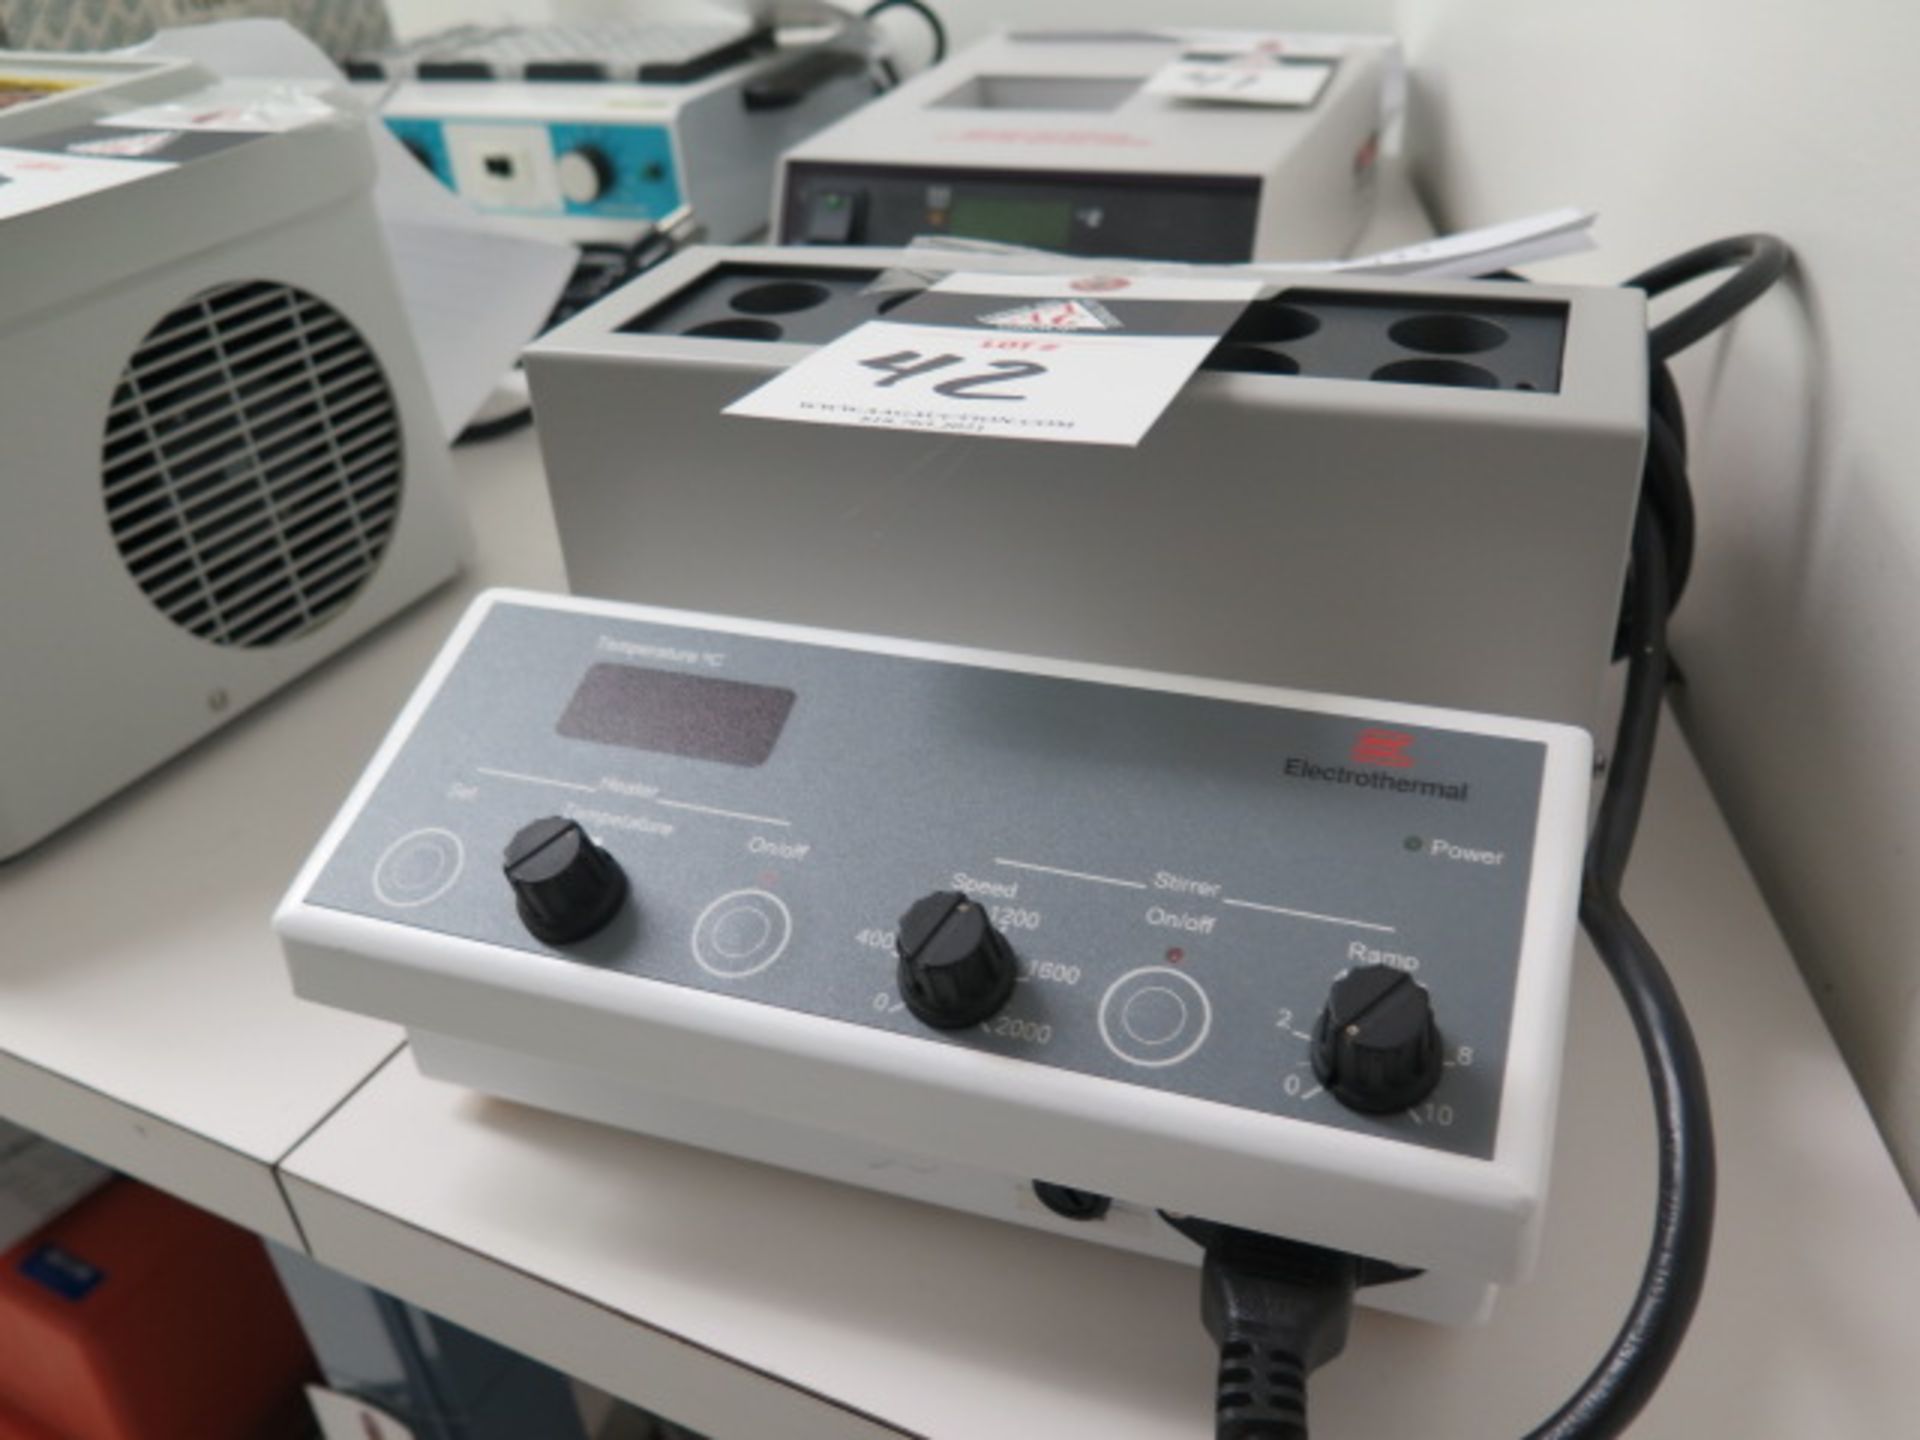 Electrothermal PS80068A Reaction Station s/n 10055027 (SOLD AS-IS - NO WARRANTY) - Image 3 of 6